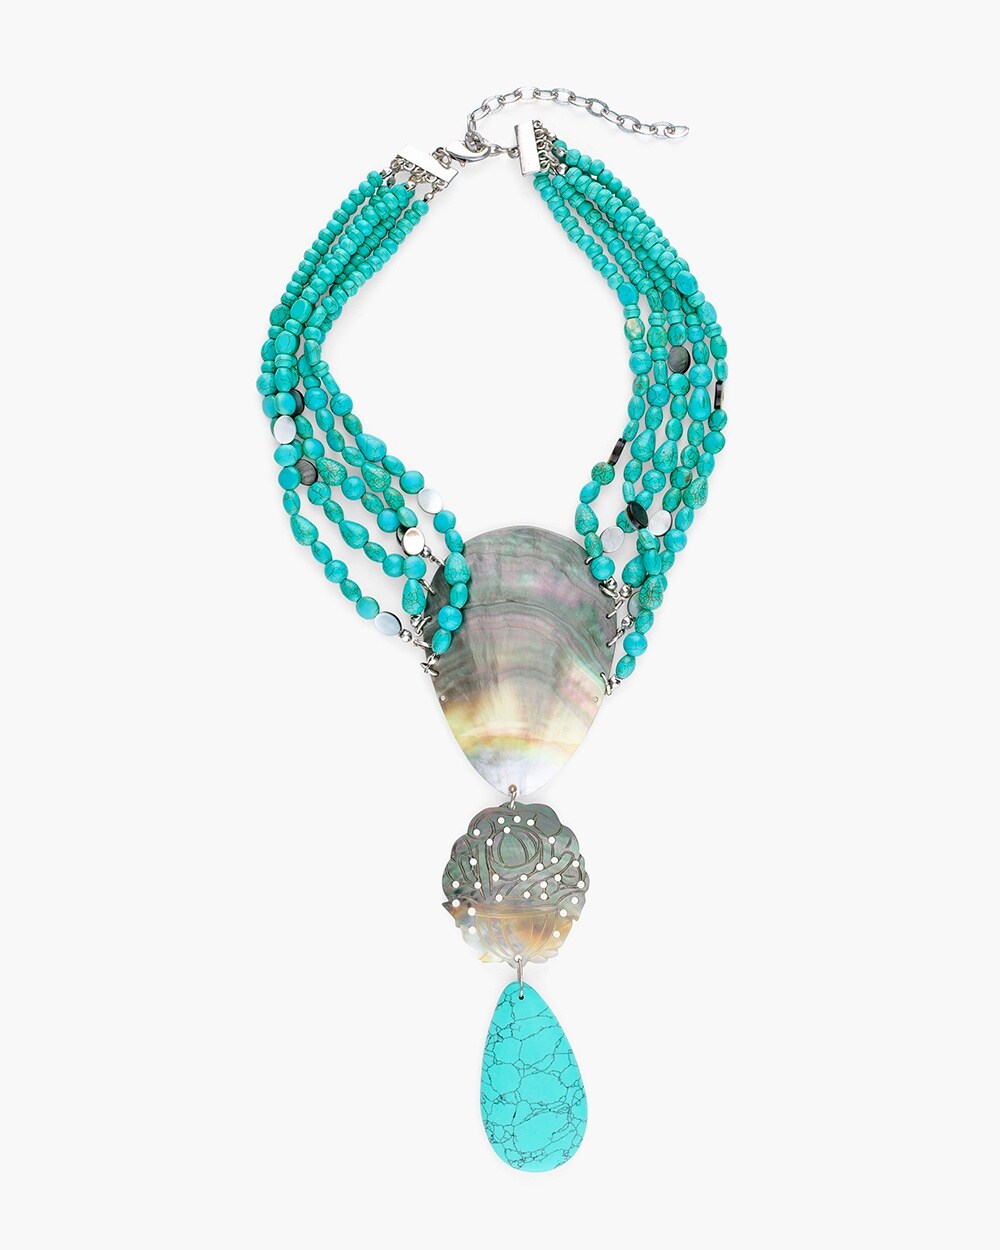 Turquoise and Neutral Statement Necklace